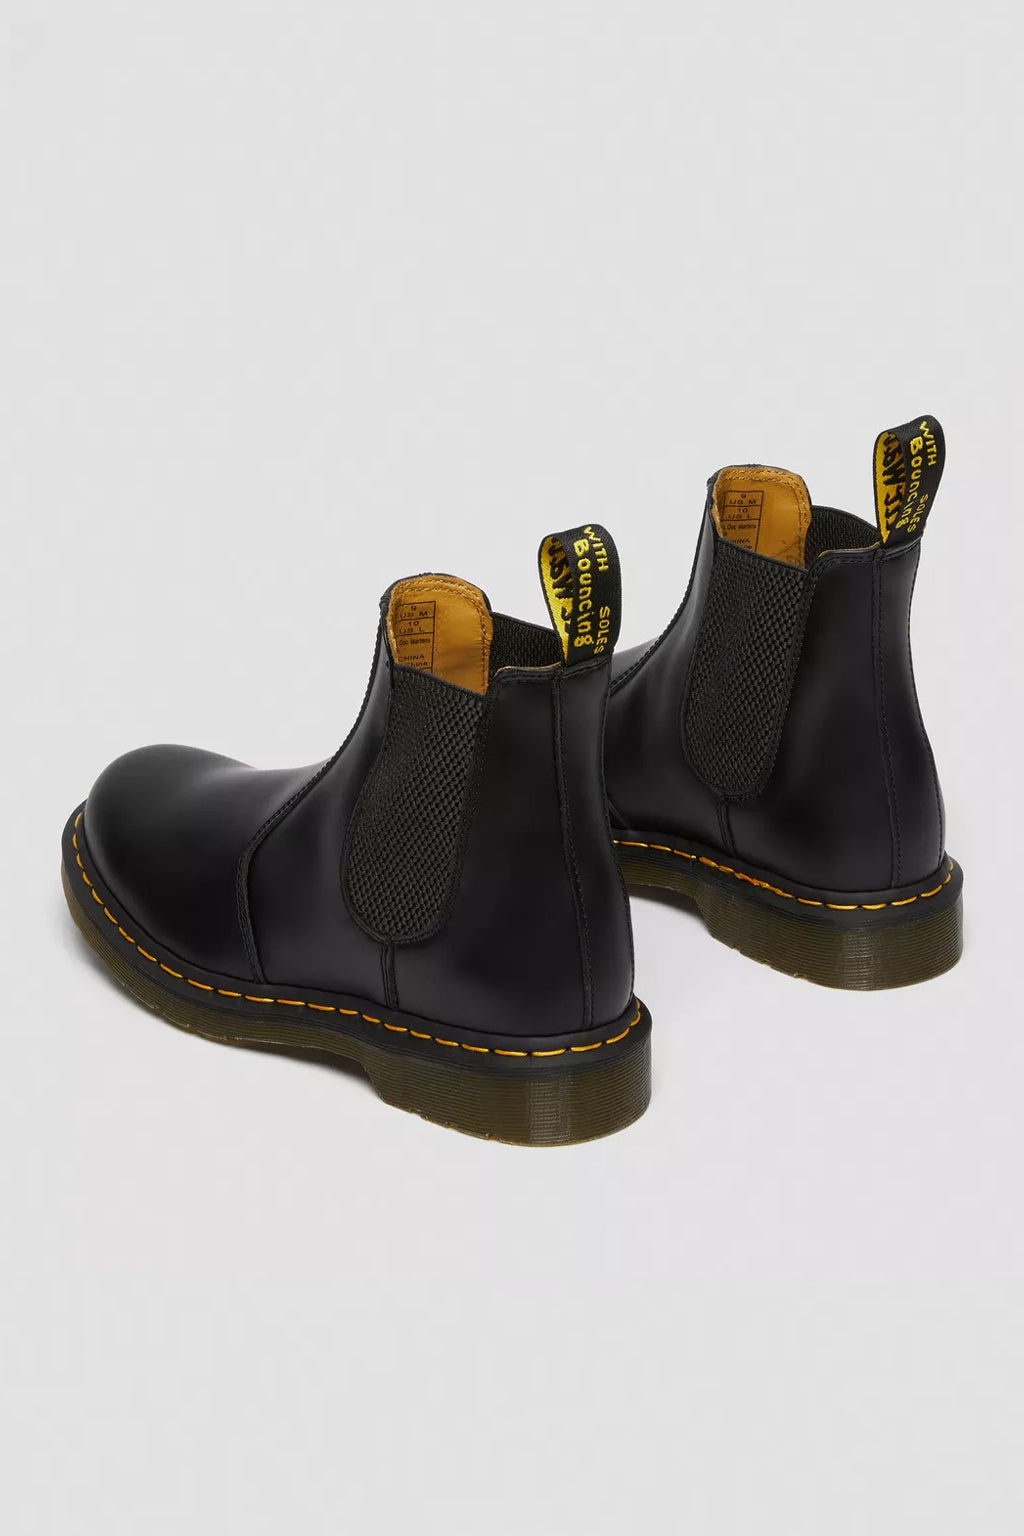 2976 Smooth Leather Chelsea Boots Boots Dr. Martens   